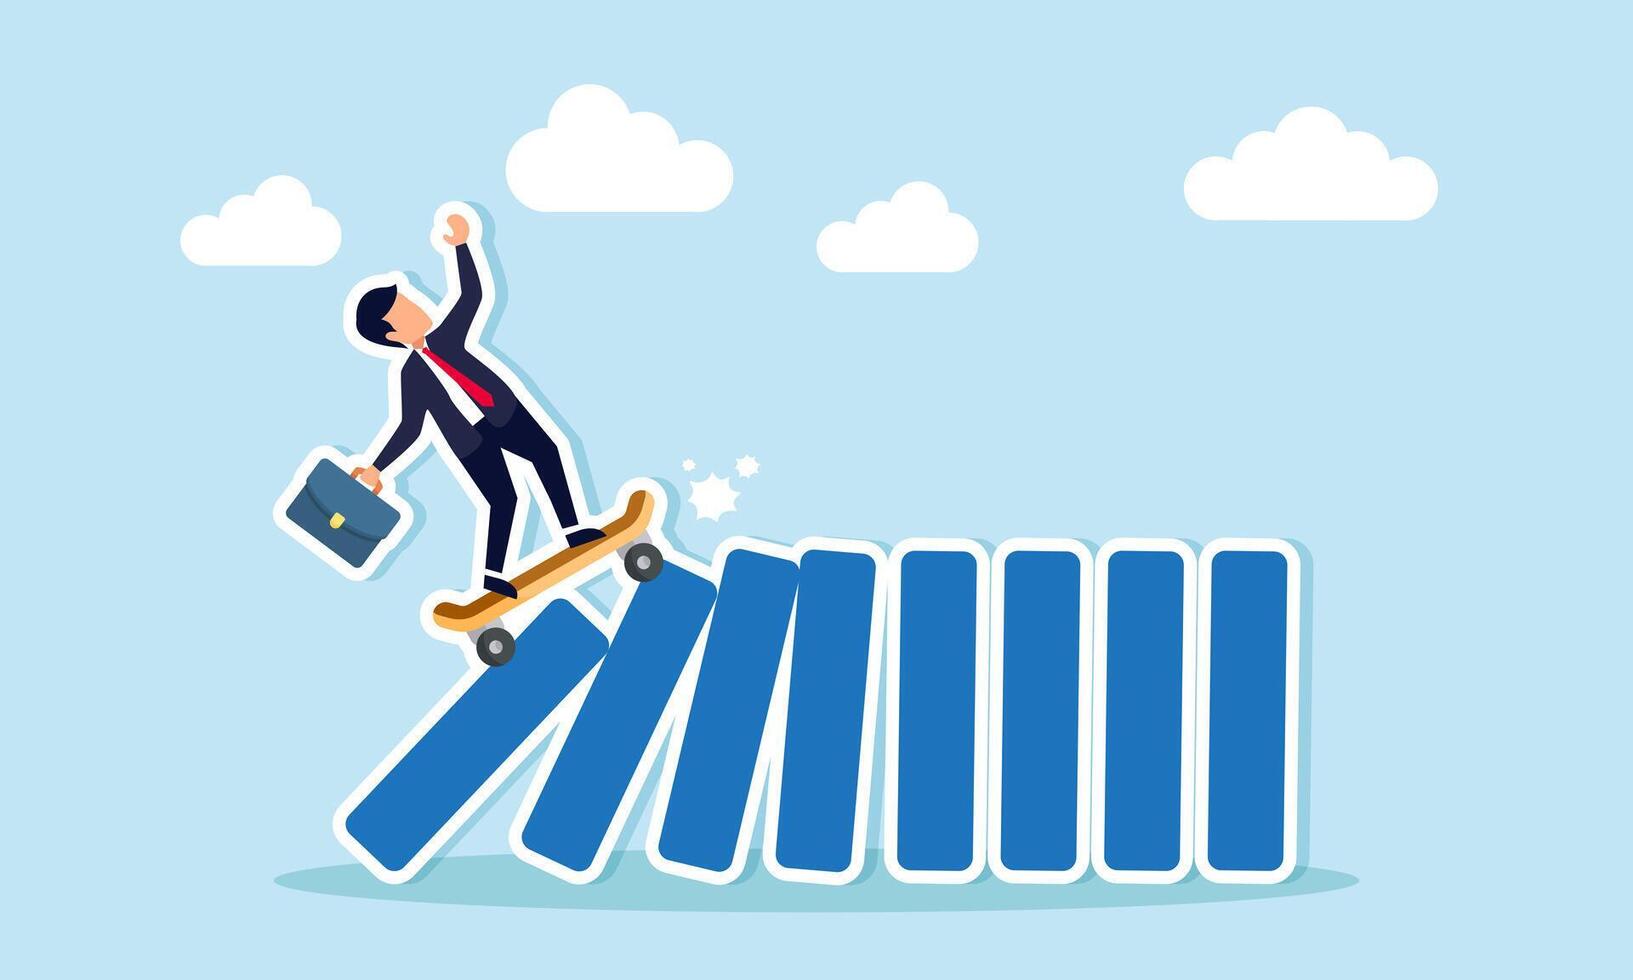 New disruptive innovation causing business upheaval, transforming and challenging existing competitors, concept of Innovative businessman swiftly skateboards, toppling all dominos in a cascade vector